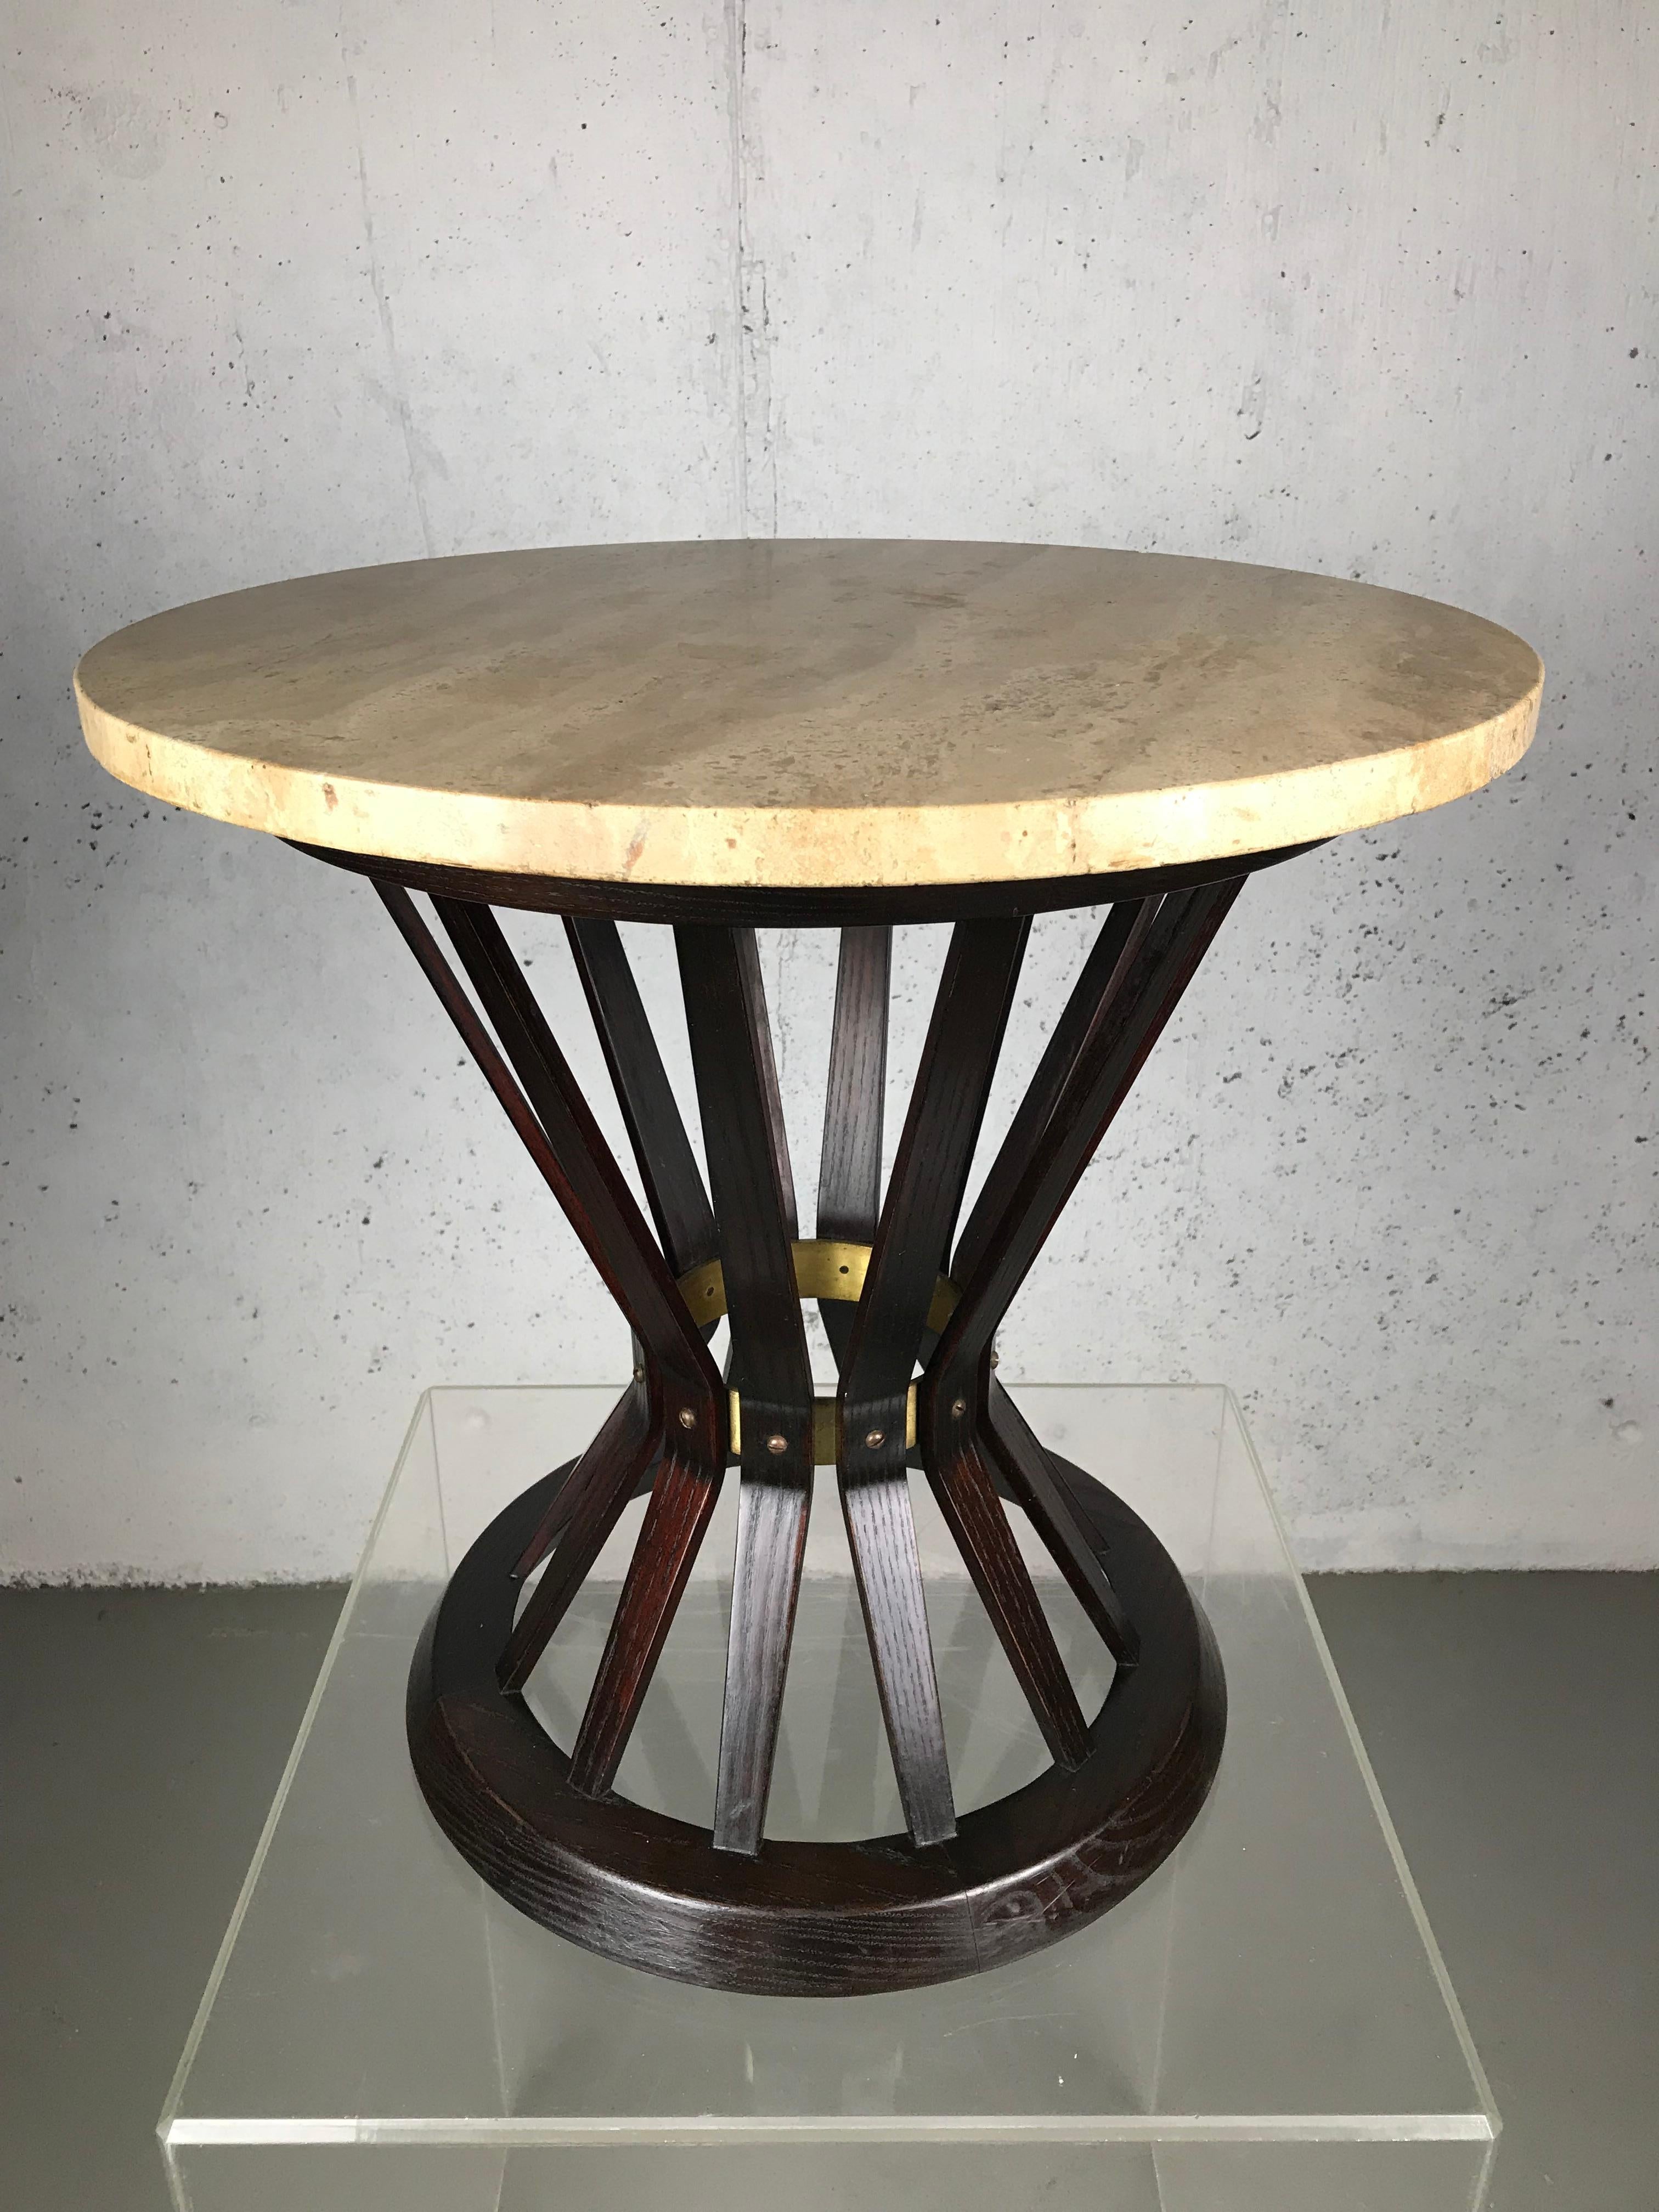 Intricate sheaf of wheat side table designed by Edward Wormley for Dunbar Furniture Corp. This table retains its original travertine marble top and is in original condition with minor wear. The top retains its paper label and the gold Dunbar Badge